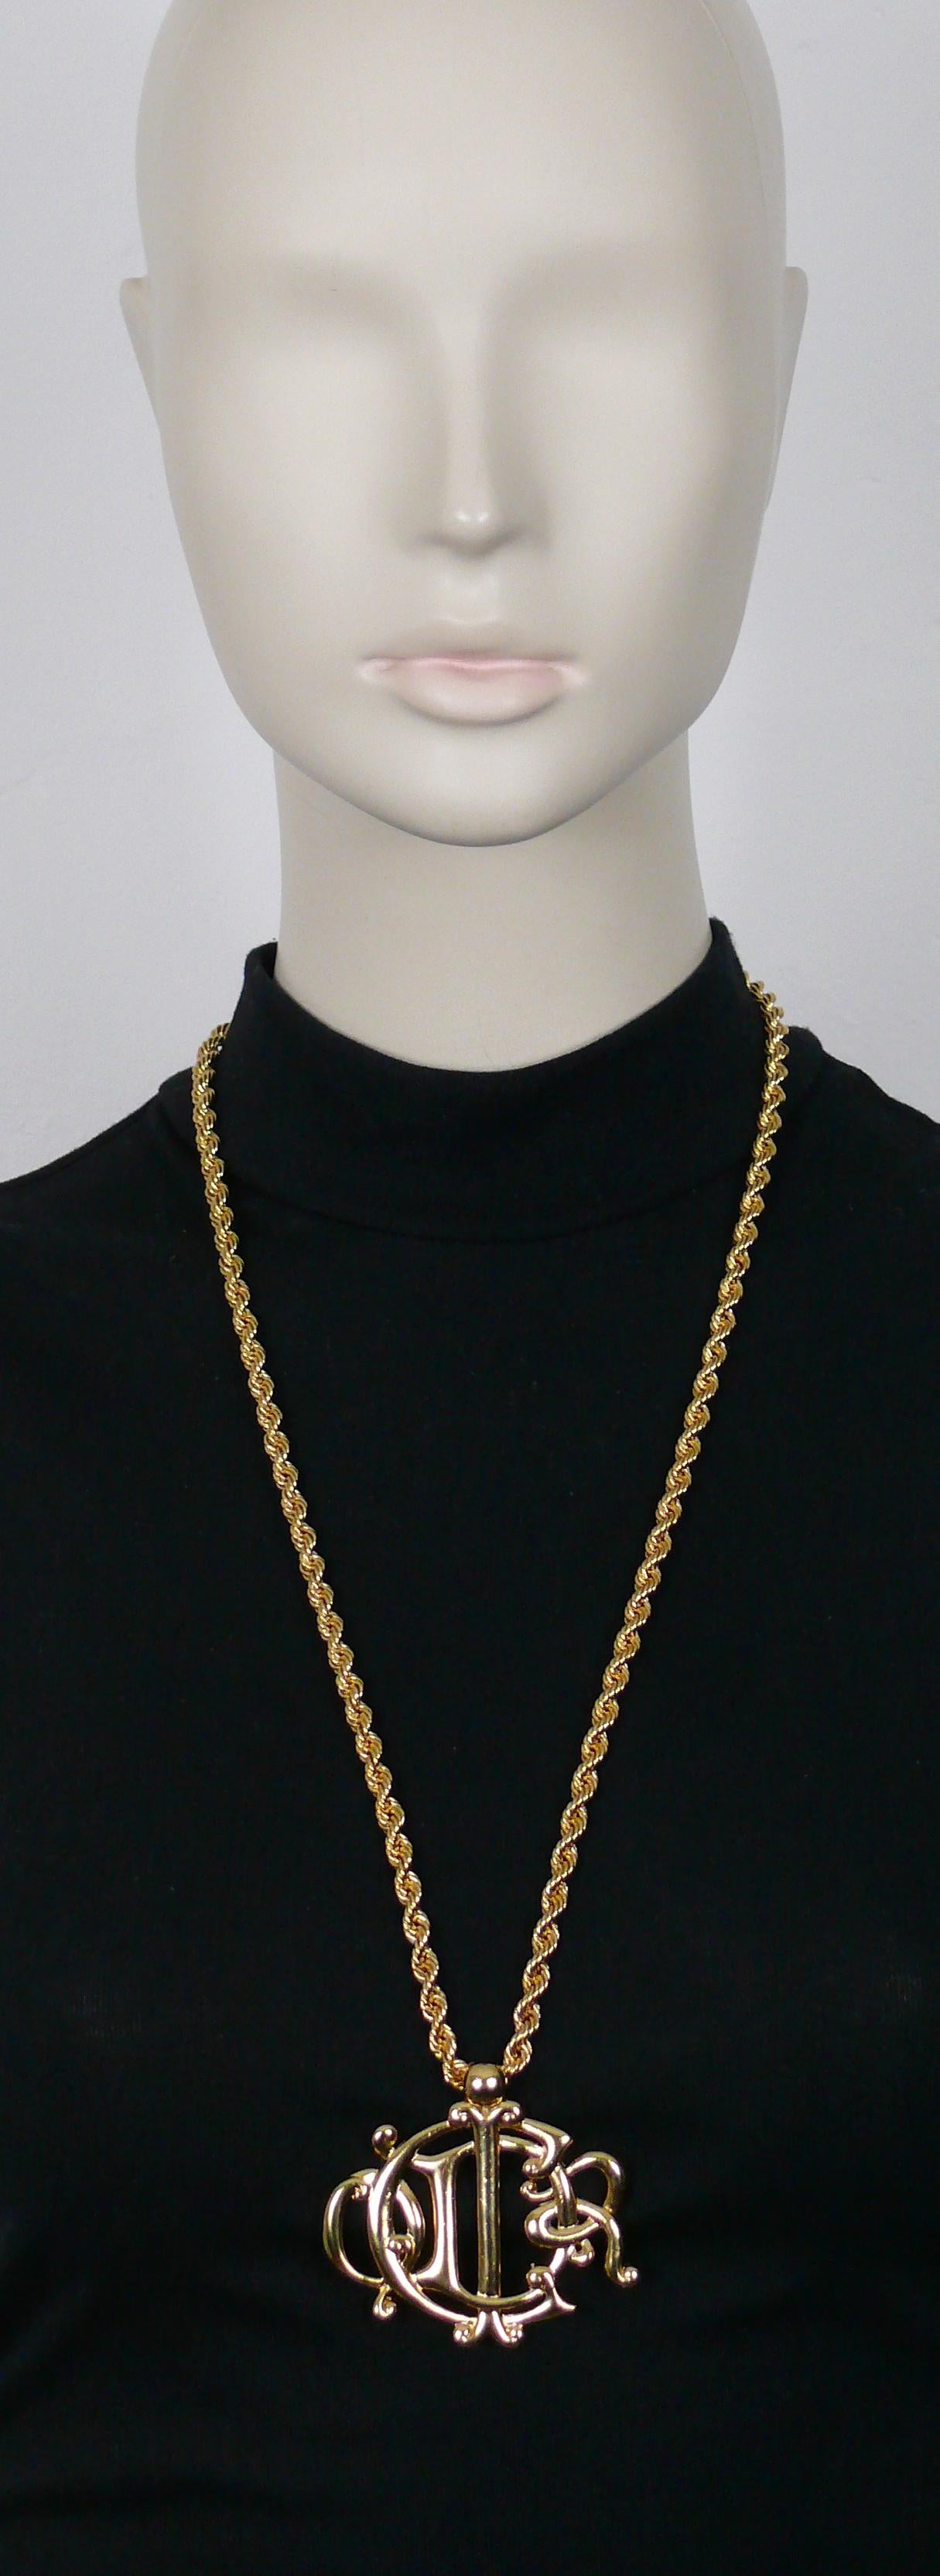 CHRISTIAN DIOR vintage gold tone chain necklace featuring a large C DIOR logo pendant.

Secure clasp closure.

Embossed CHR. DIOR ©.

Indicative measurements : chain length approx. 70.5 cm (27.76 inches) / logo pendant (including bail) approx 6 cm x